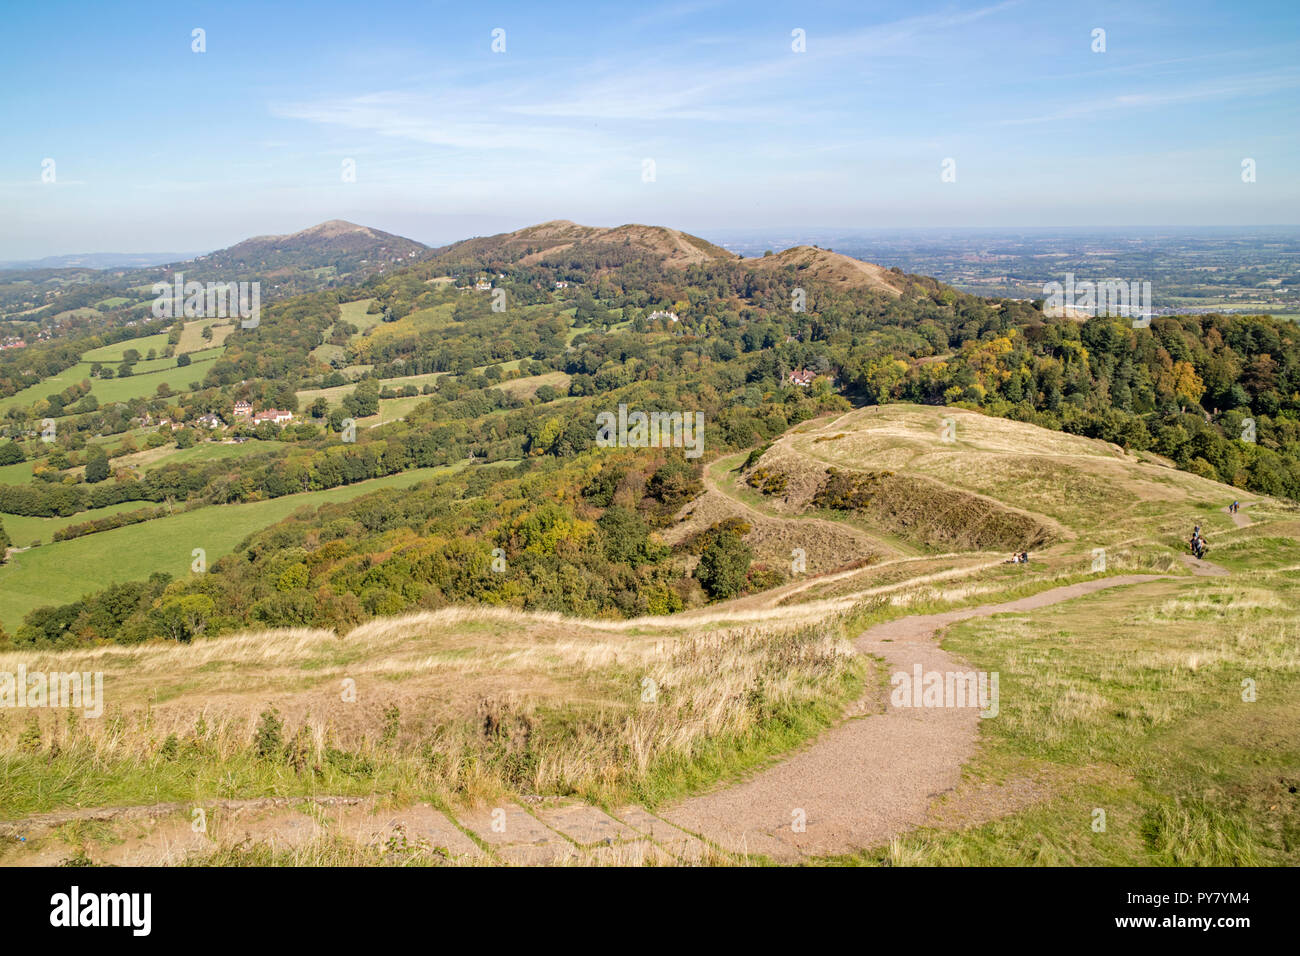 Le Malvern Hills d'Herefordshire, Herefordshire, Angleterre, RU Banque D'Images